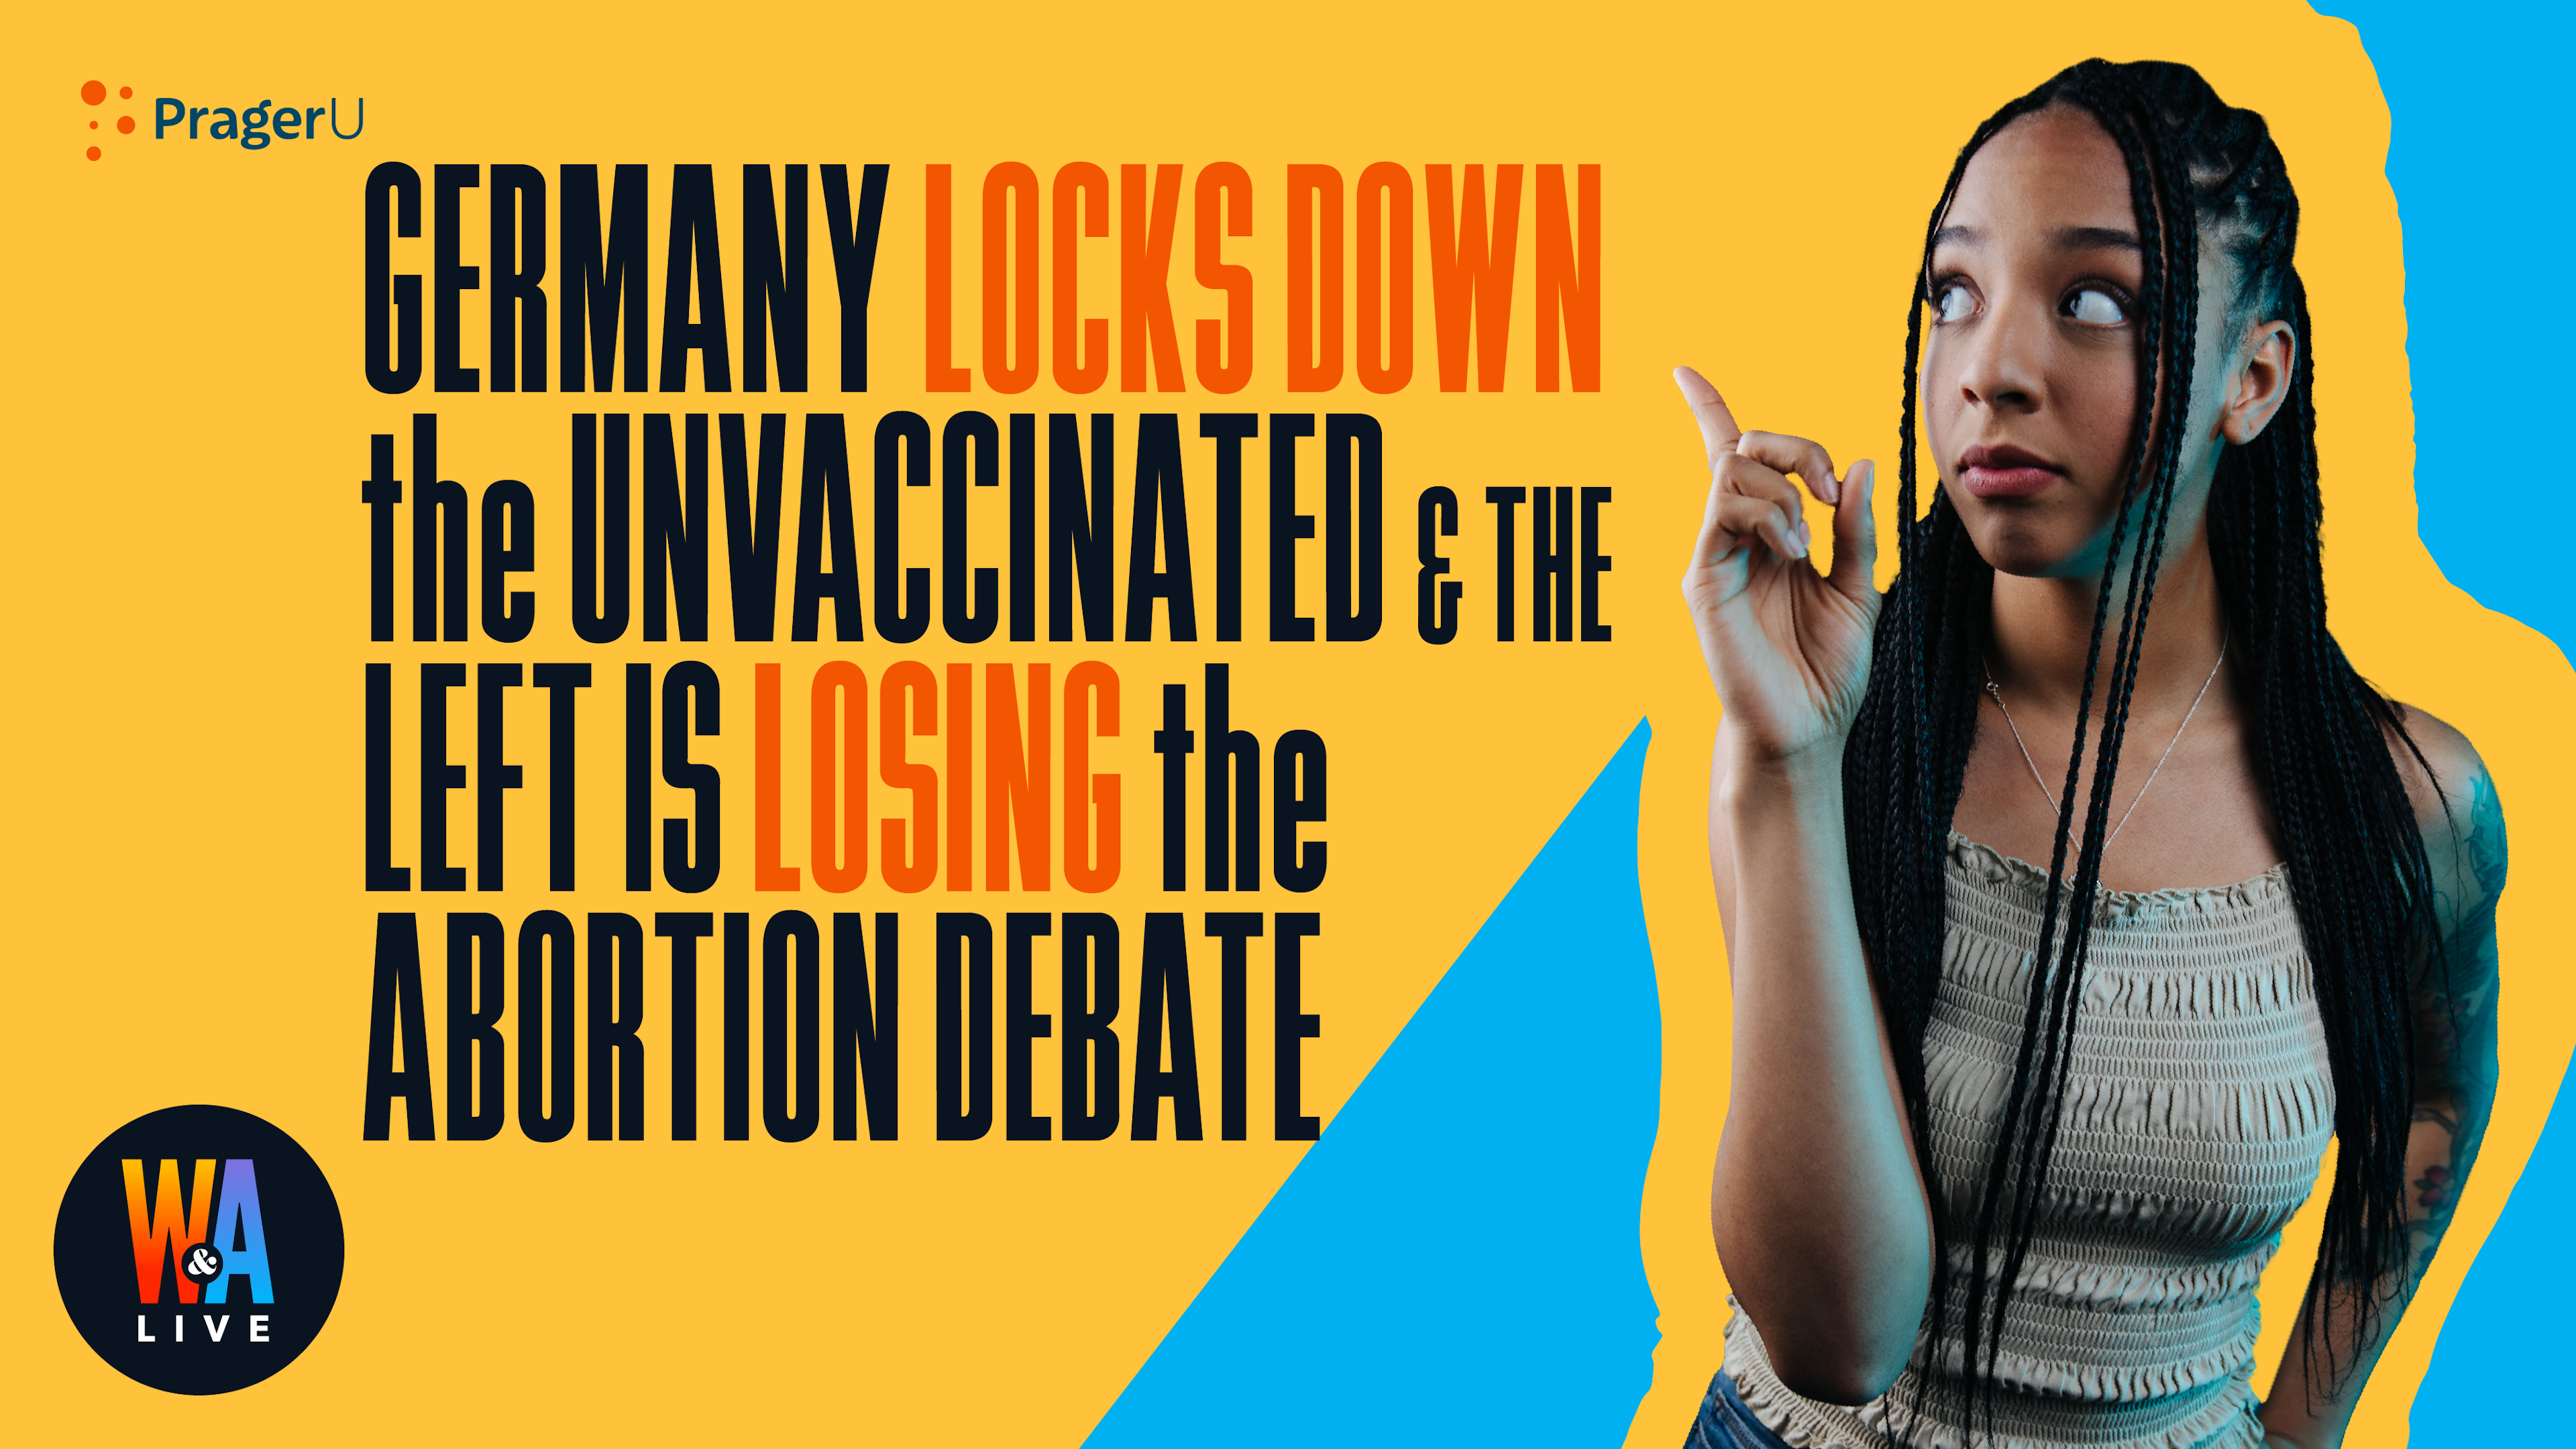 Germany Locks Down the Unvaccinated and the Left is Losing the Abortion Debate: 12/2/21